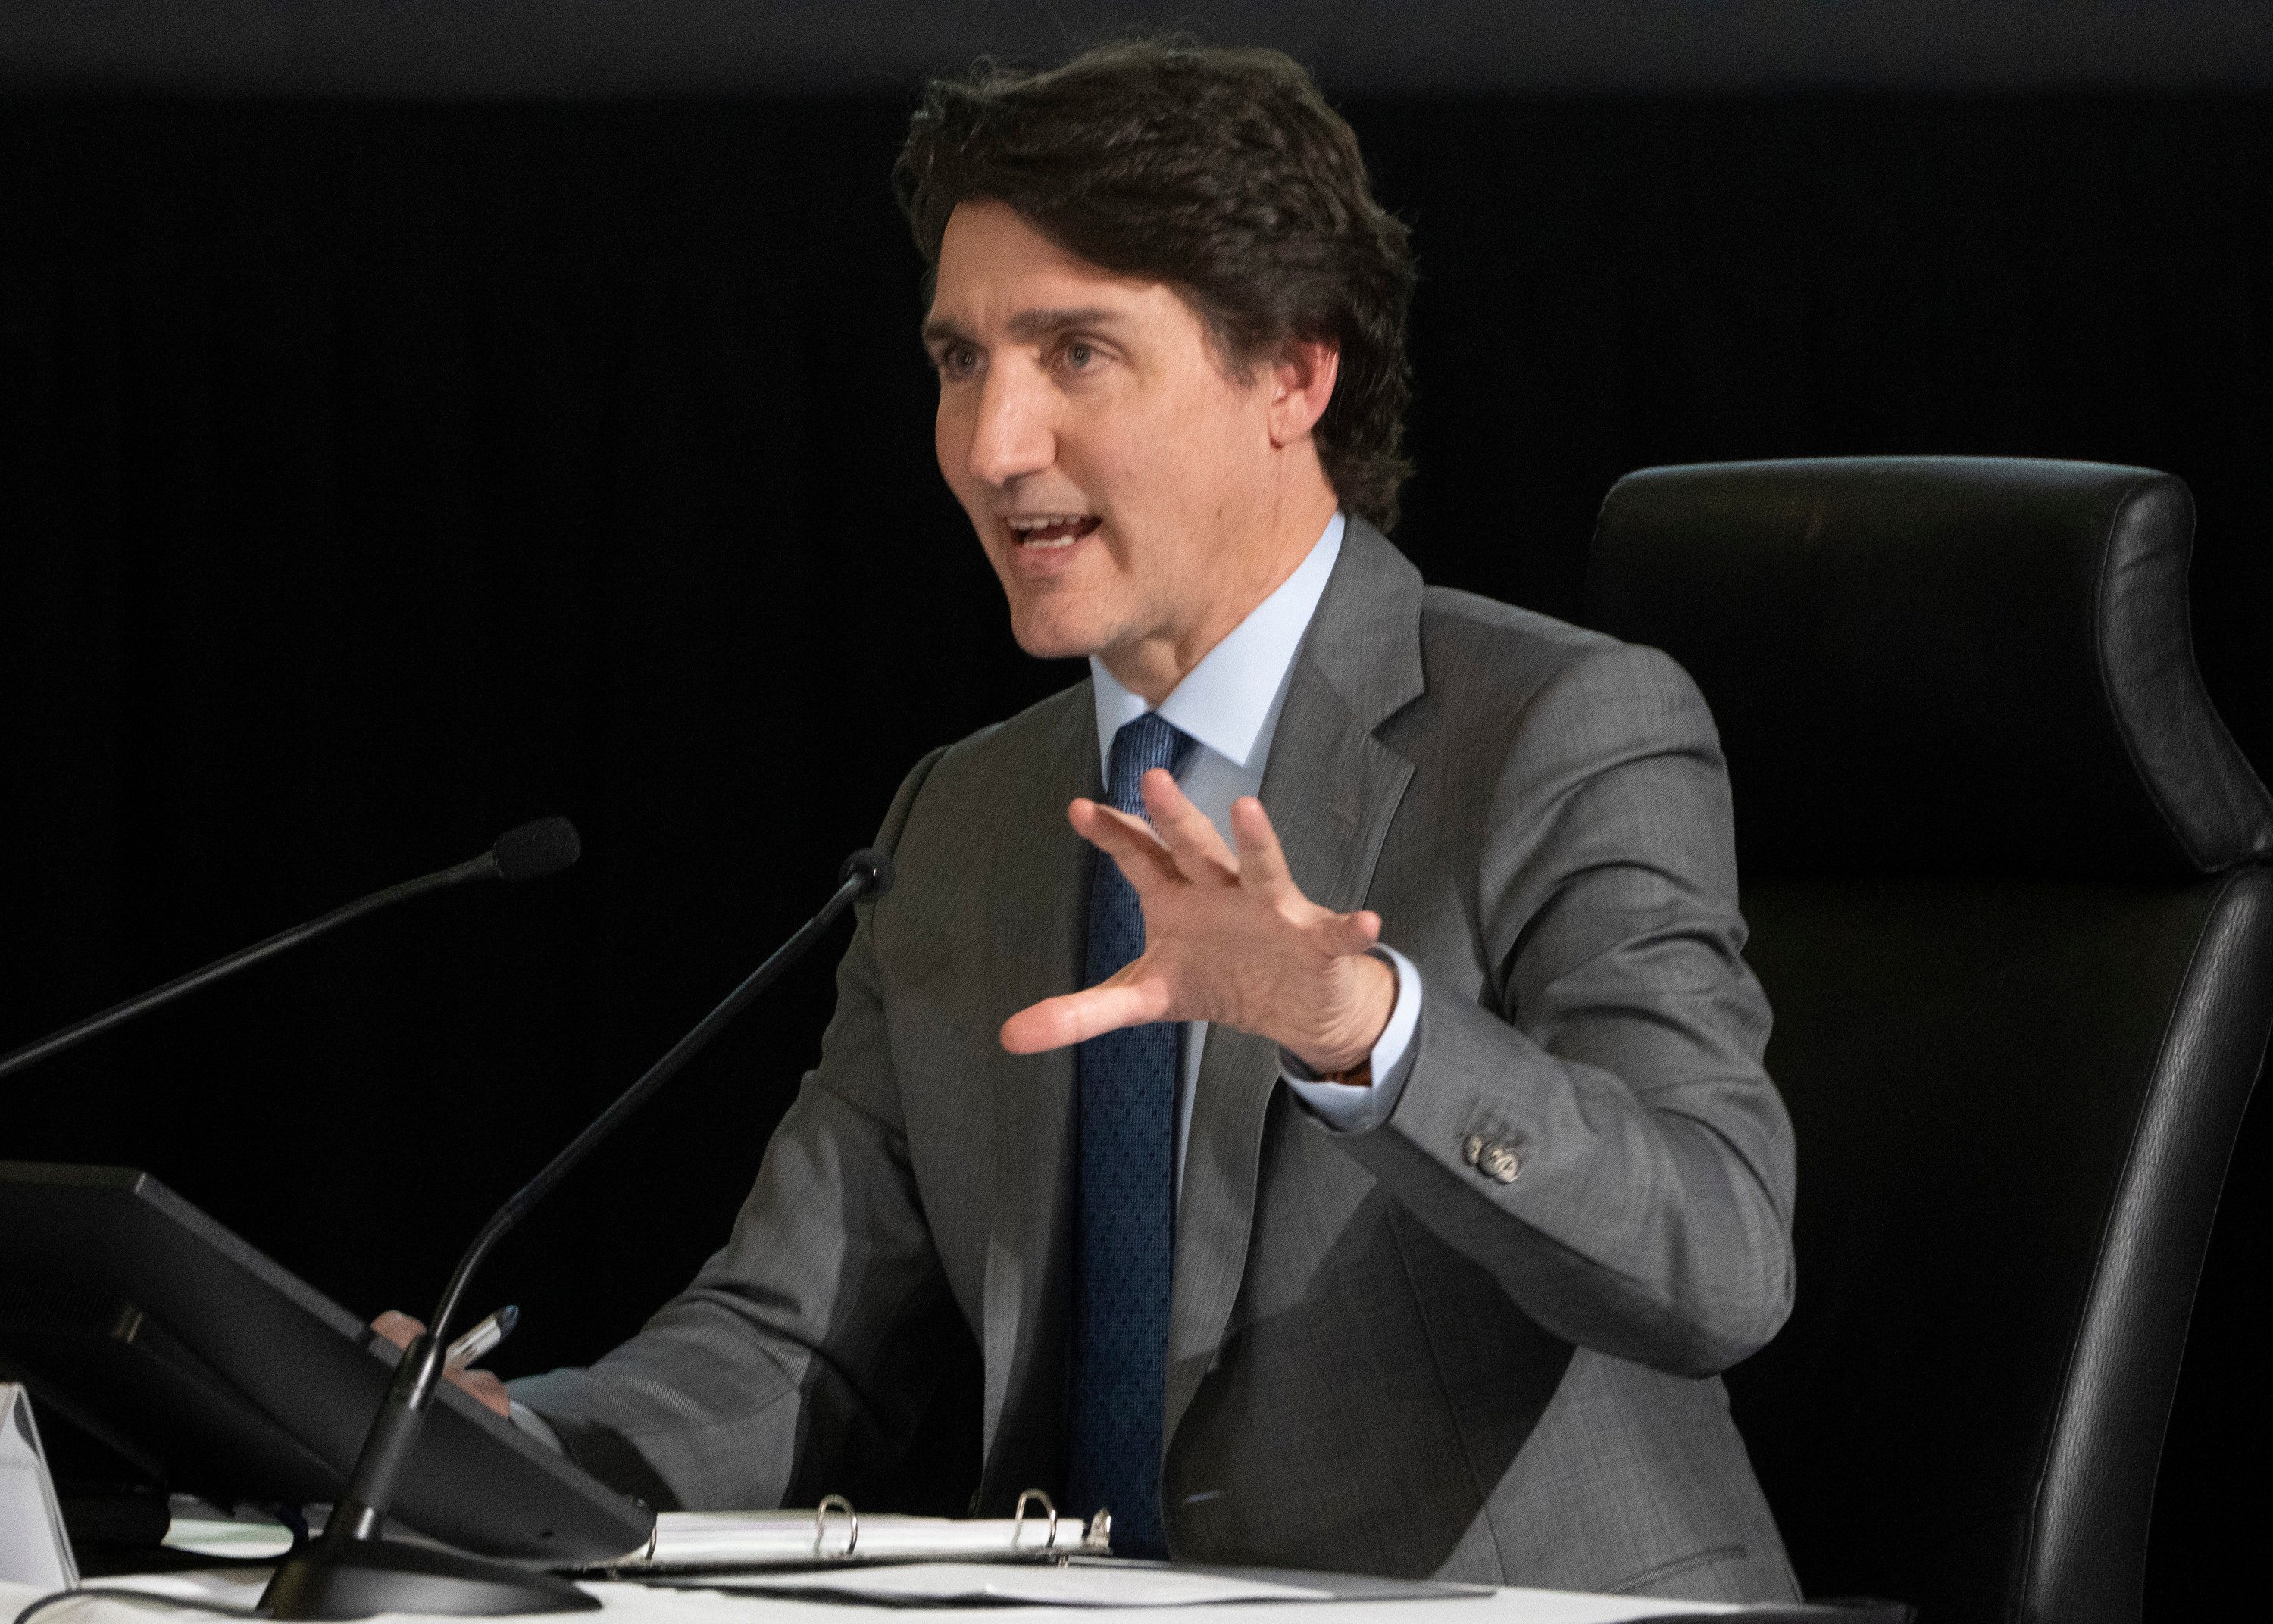 Canada Prime Minister Justin Trudeau at the inquiry on Wednesday. Photo: Canadian Press via AP